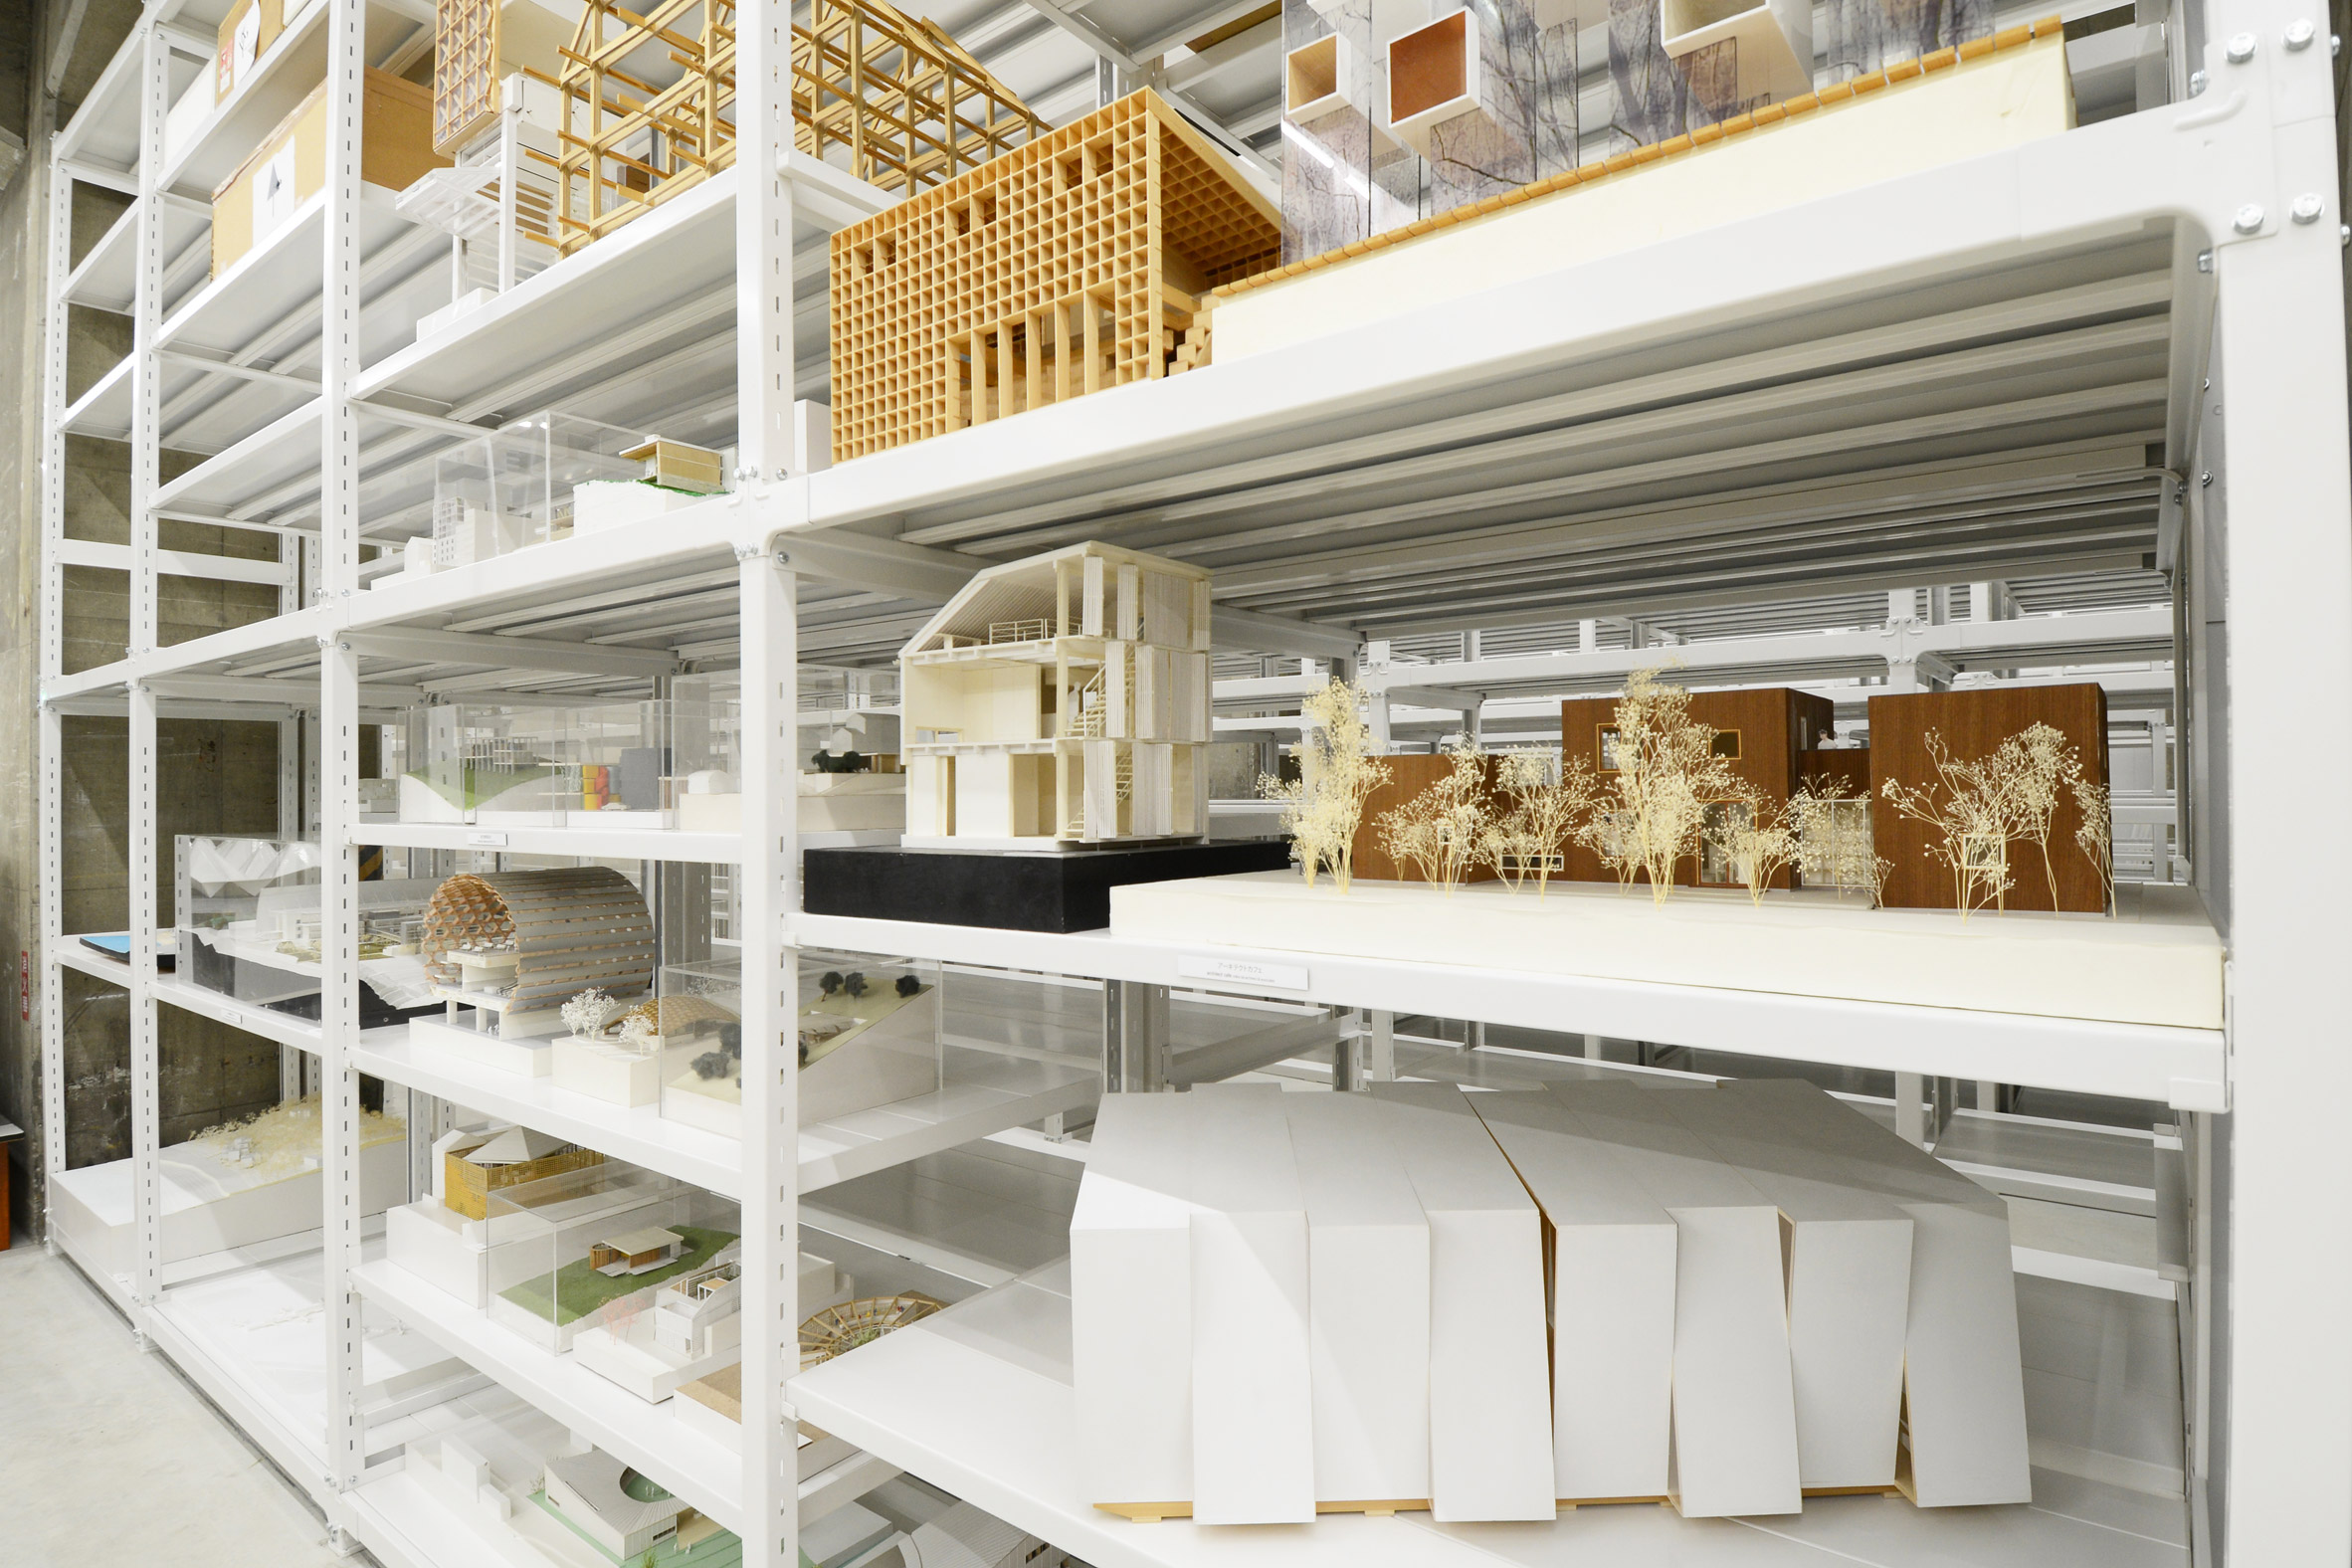 Museum dedicated to architecture models opens in Japan